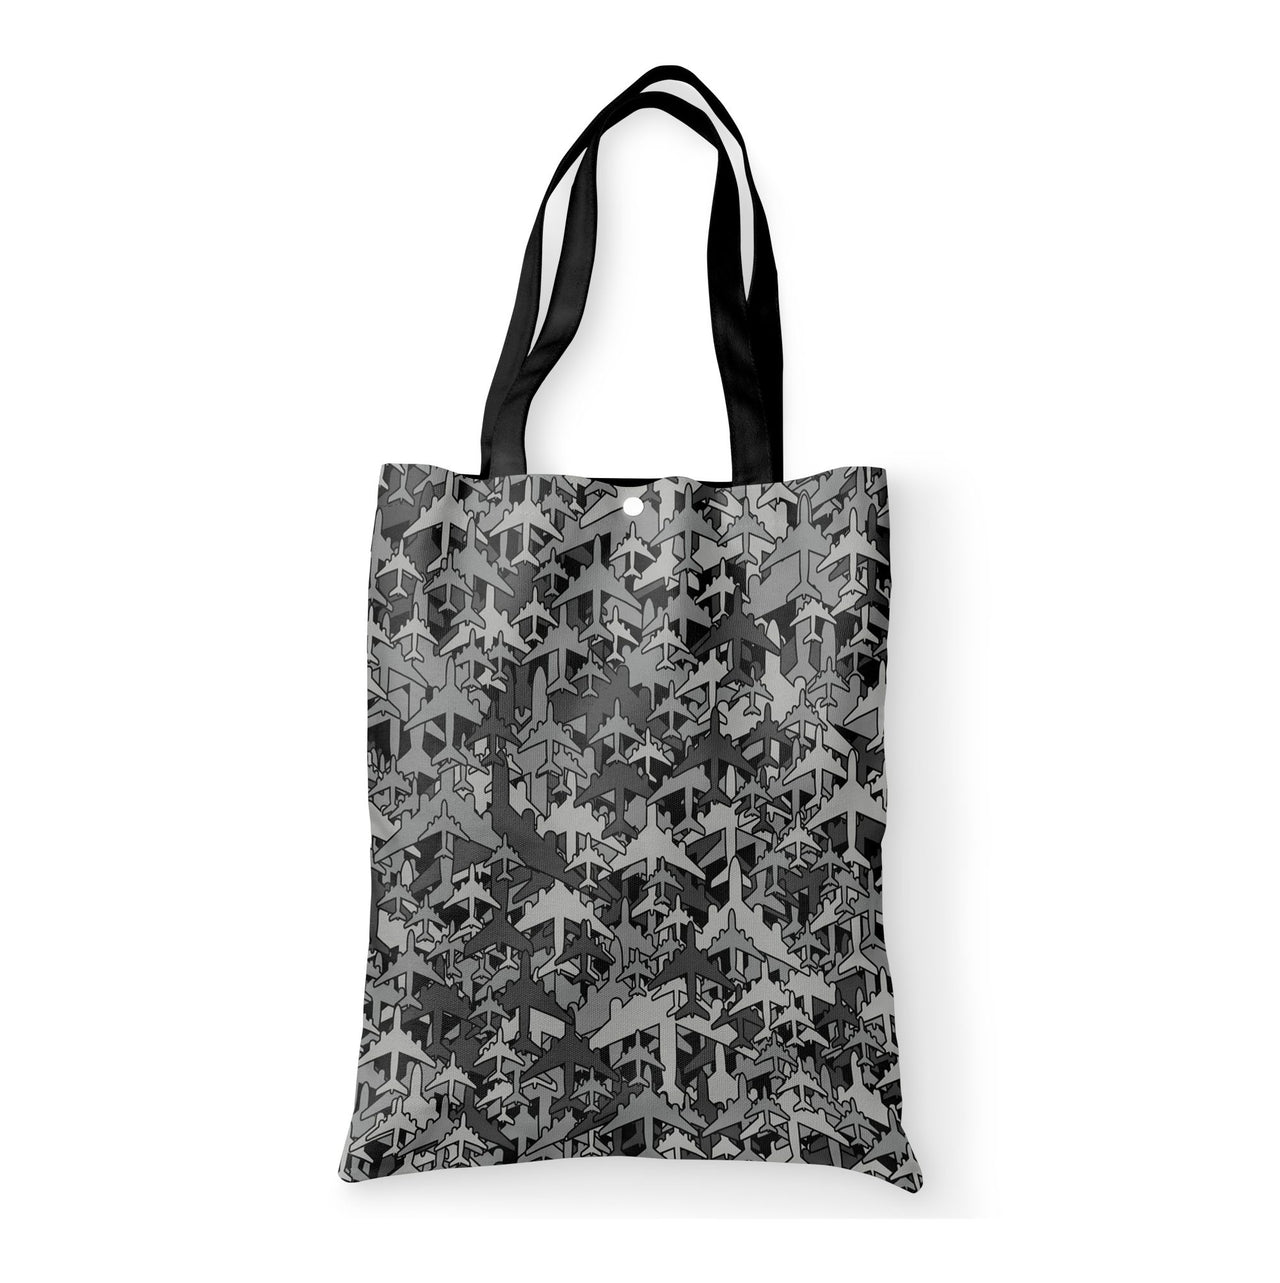 Dark Coloured Airplanes Designed Tote Bags